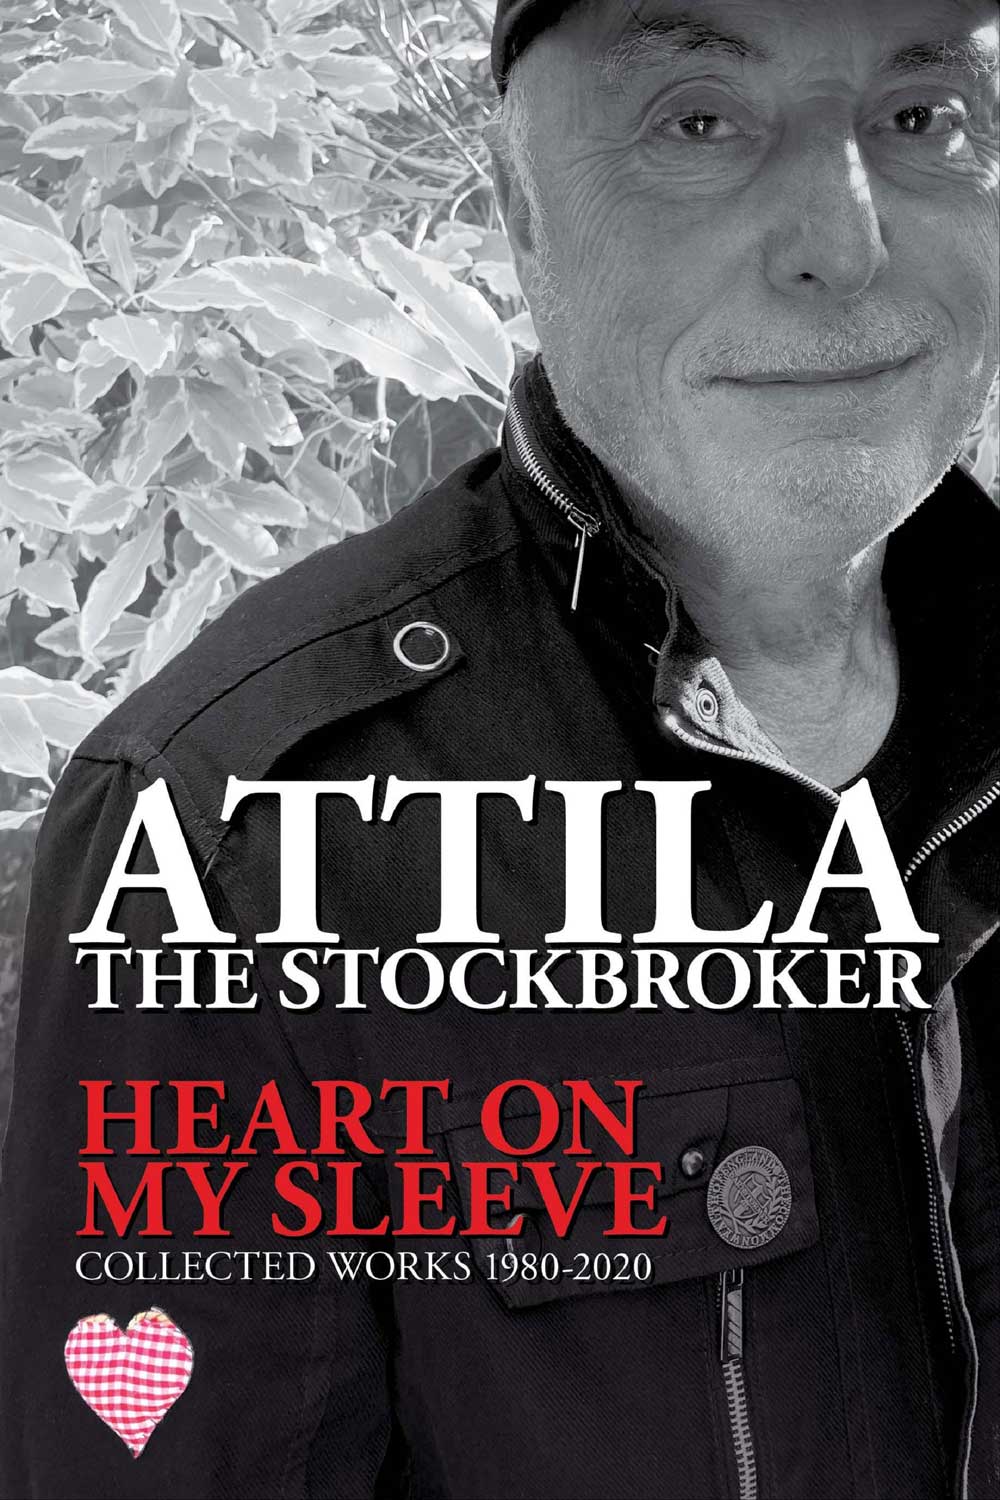 Attila The Stockbroker - Heart On My Sleeve Collected Works 1980-2020